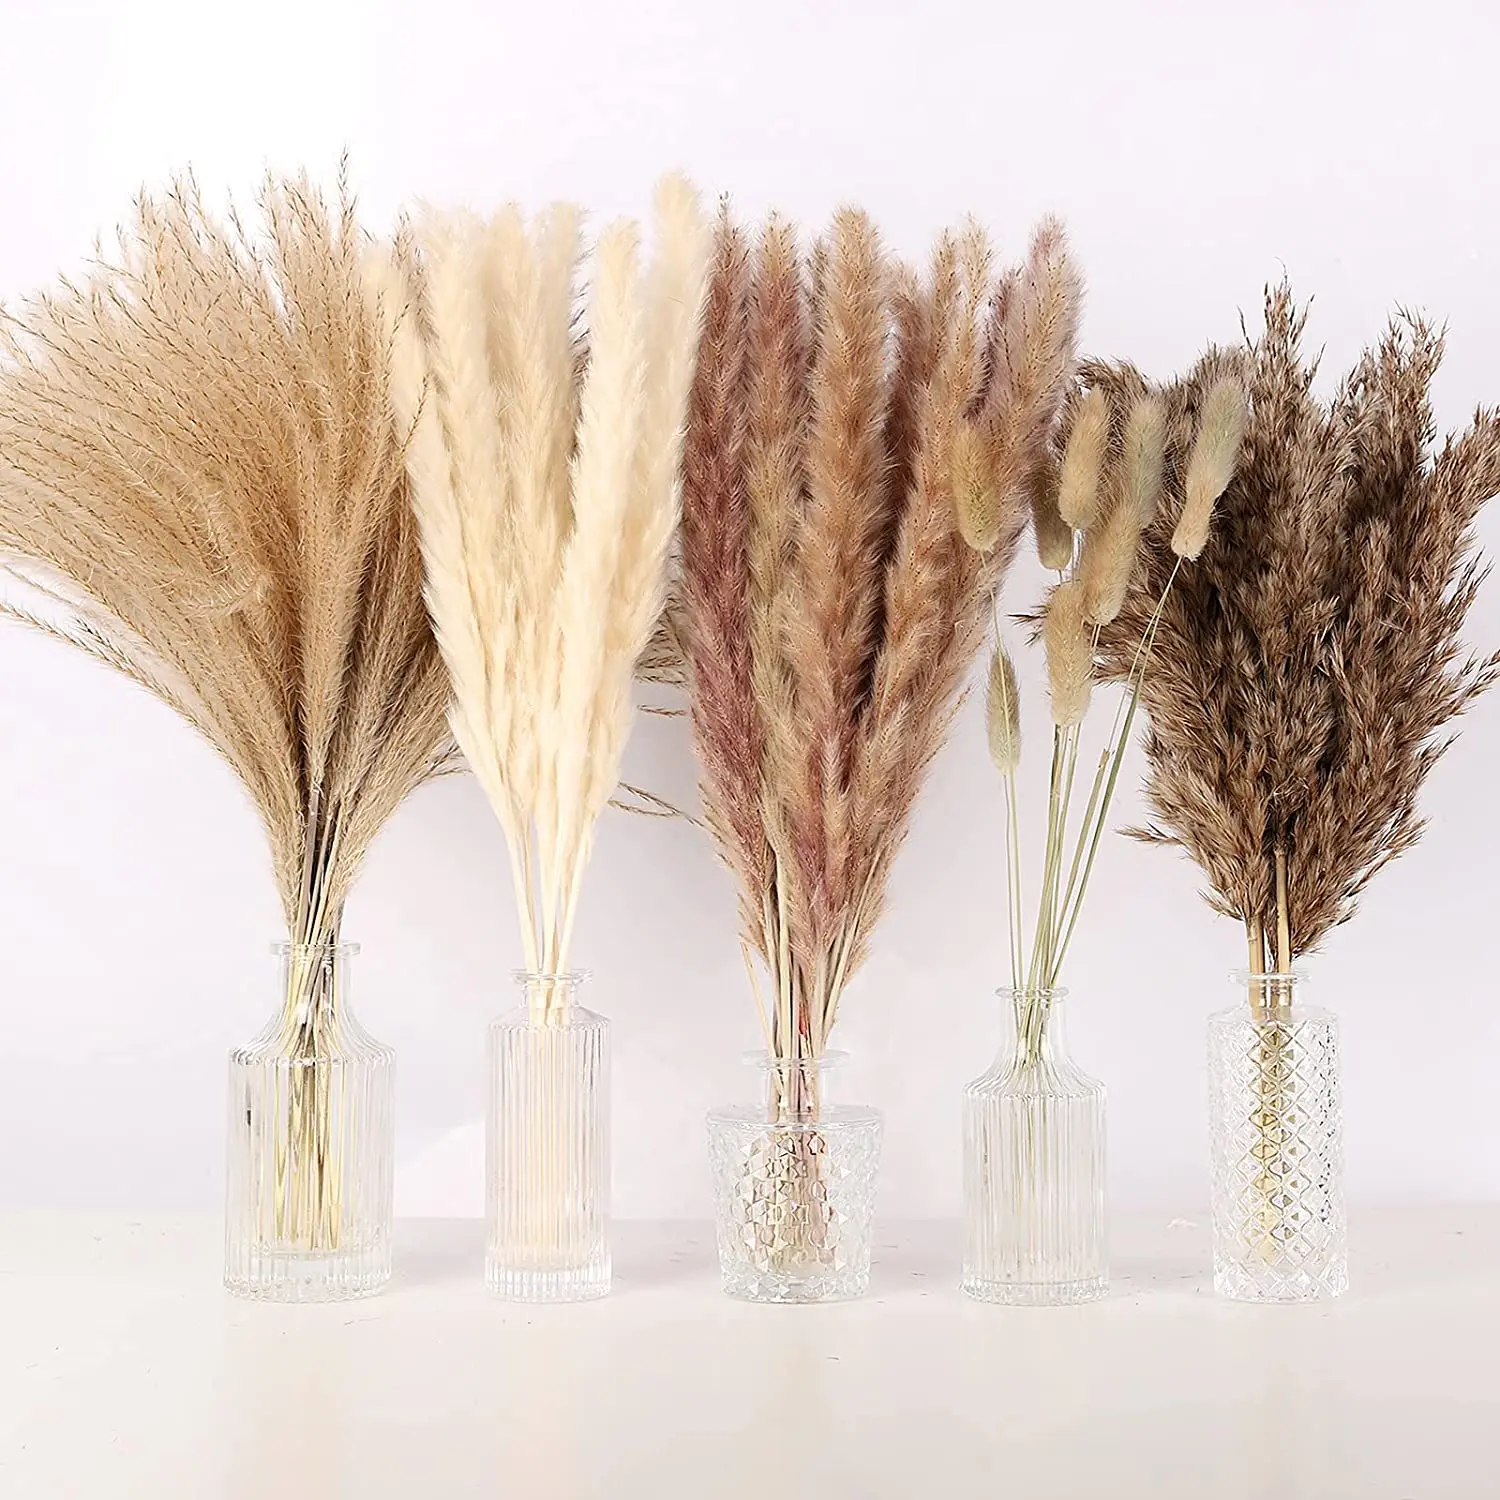 

75pcs Natural Pampas Grass Fluffy Reeds Flowers Bouquet Boho Living Room Decoration Bunny Tail Grass Dried Flowers for Wedding